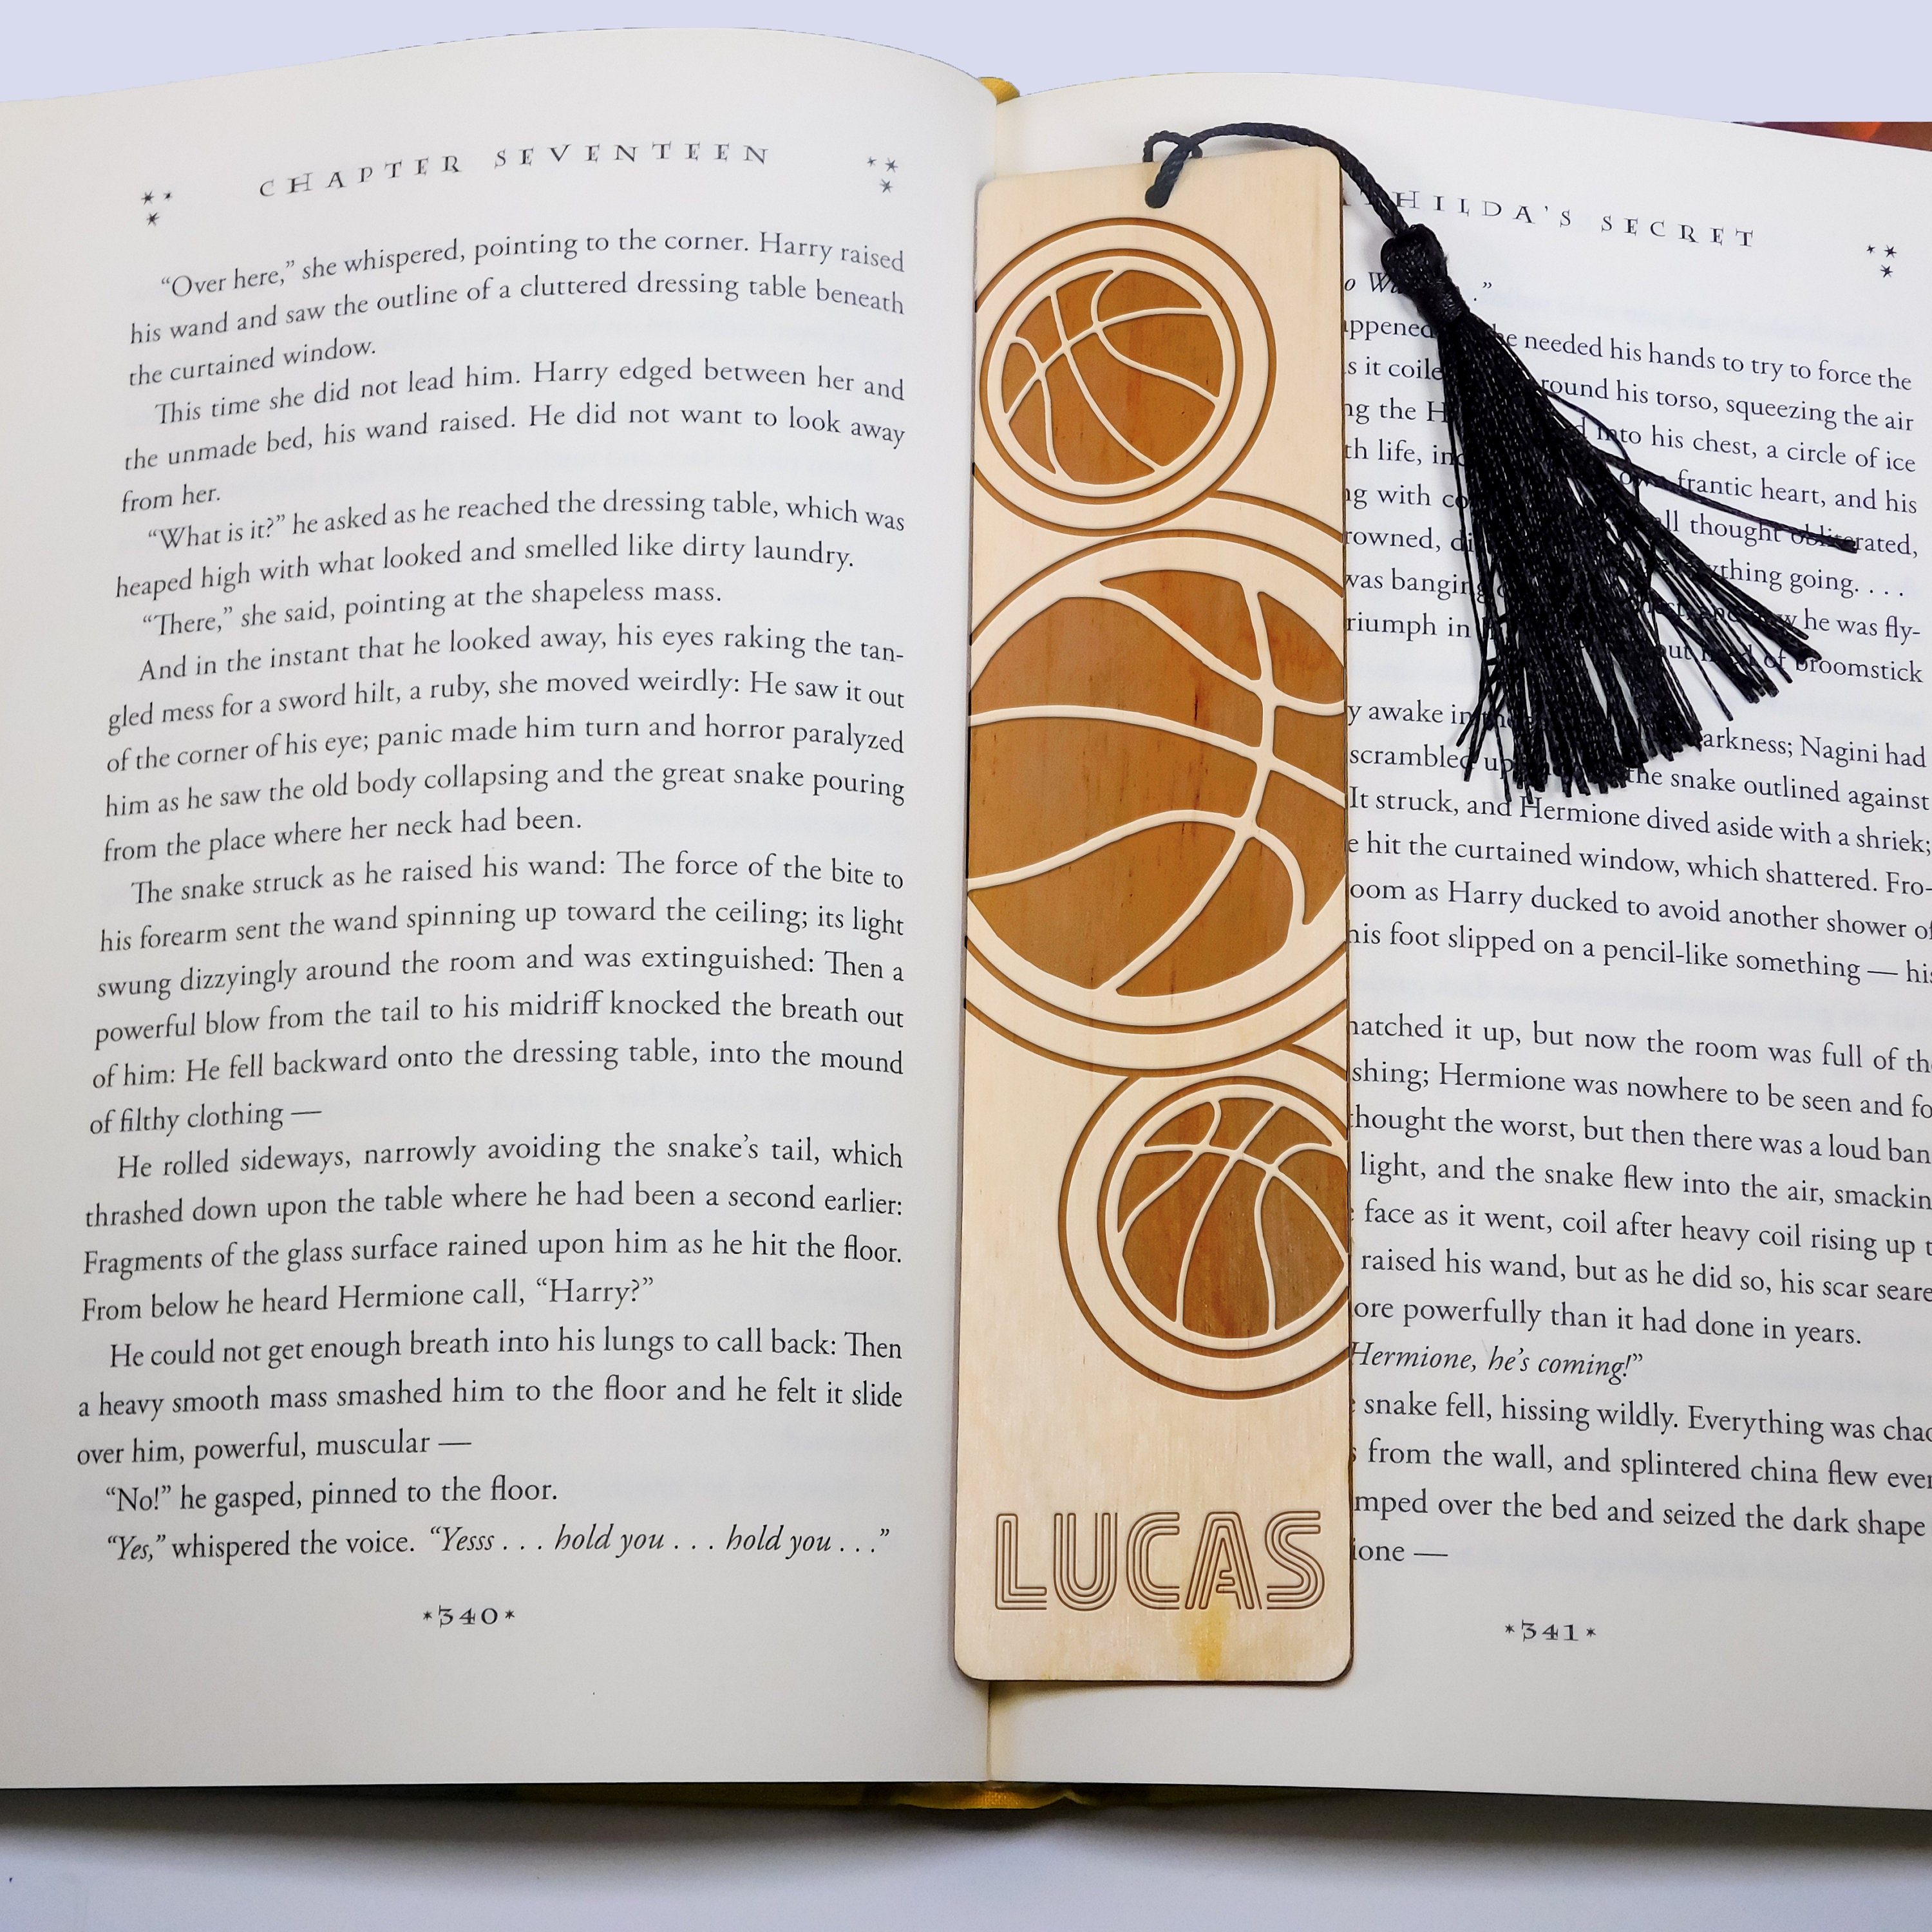 Bookmark, Basketball Bookmark, Ribbon, Gift for Coach, Teammate